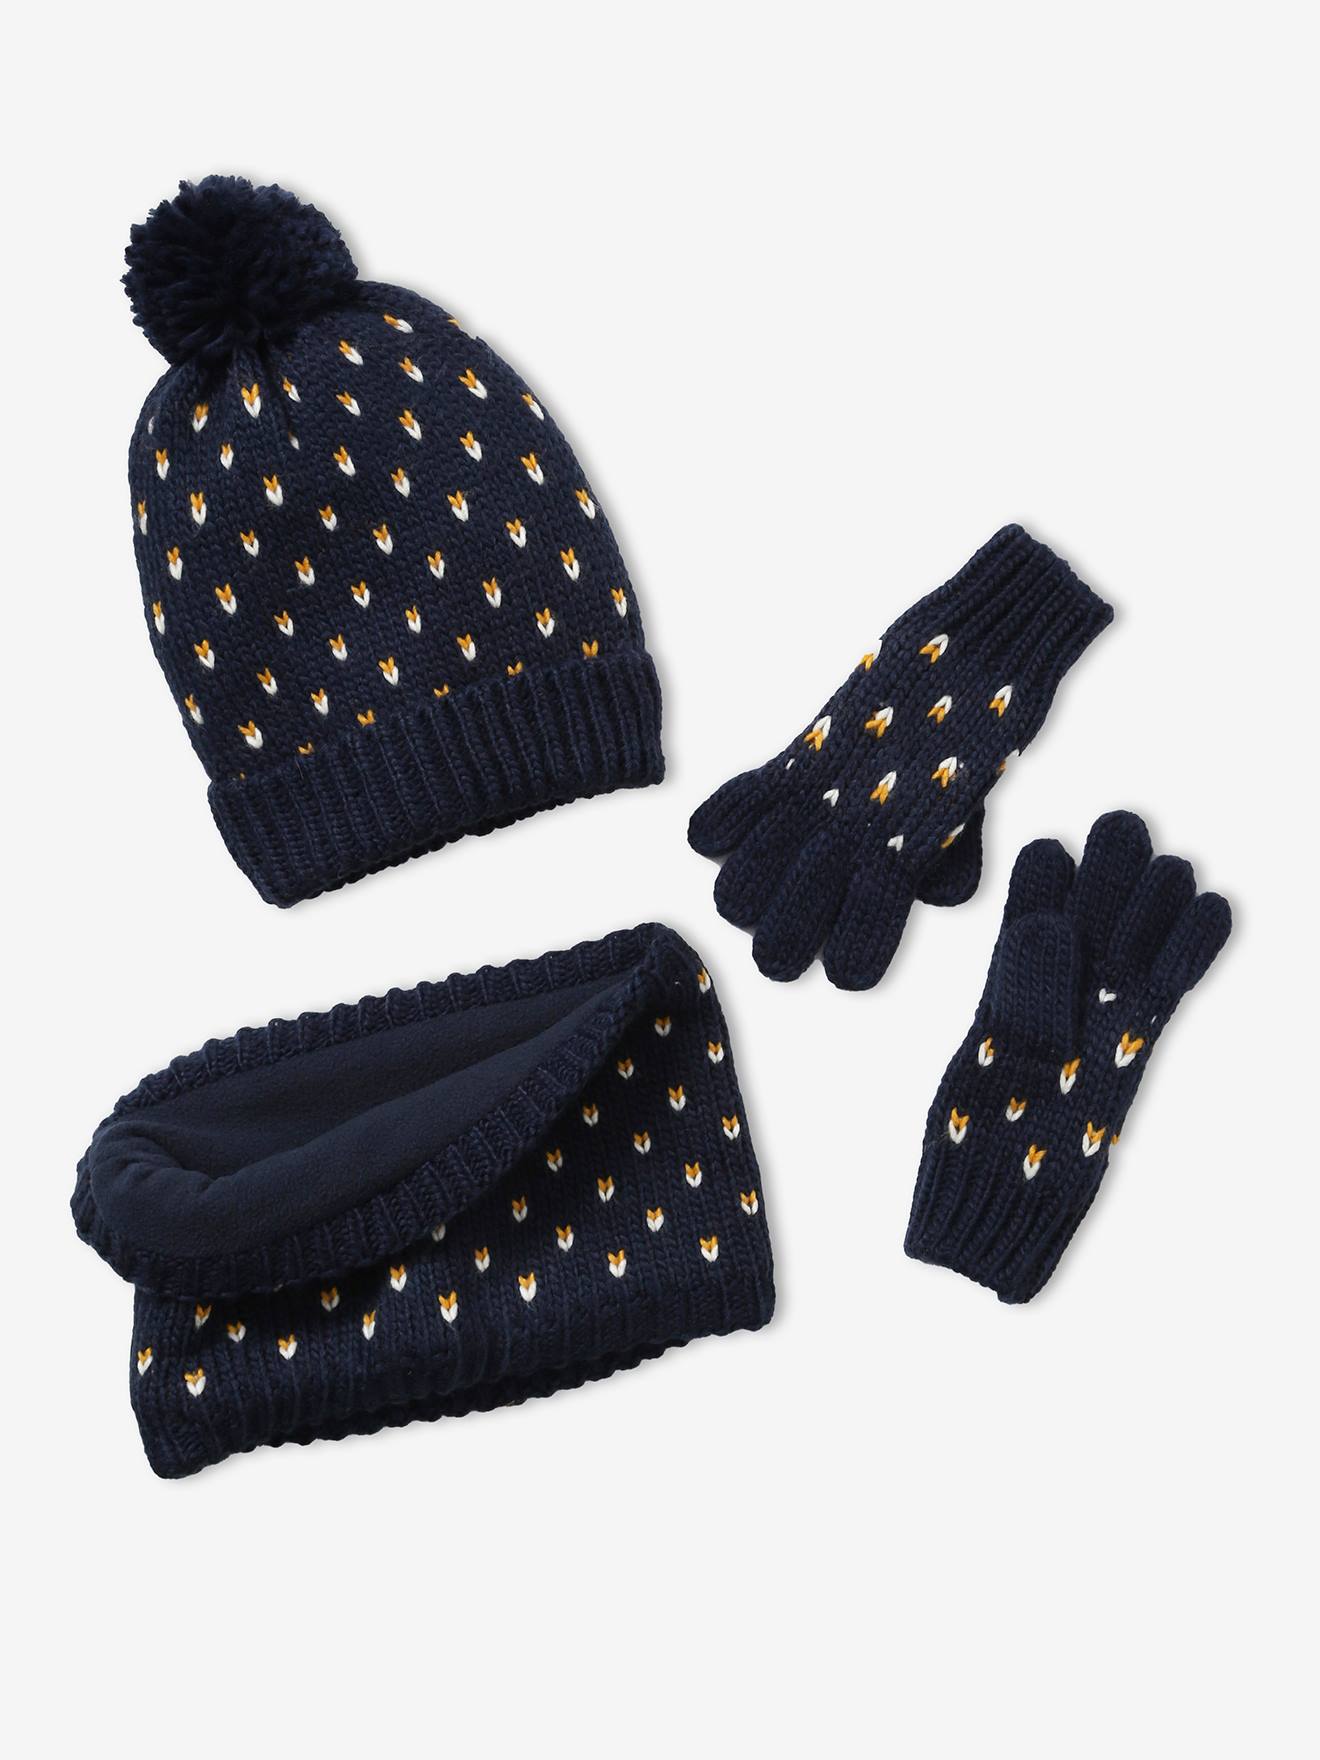 Beanie + Snood + Gloves with Hearts Set for Girls blue dark all over printed